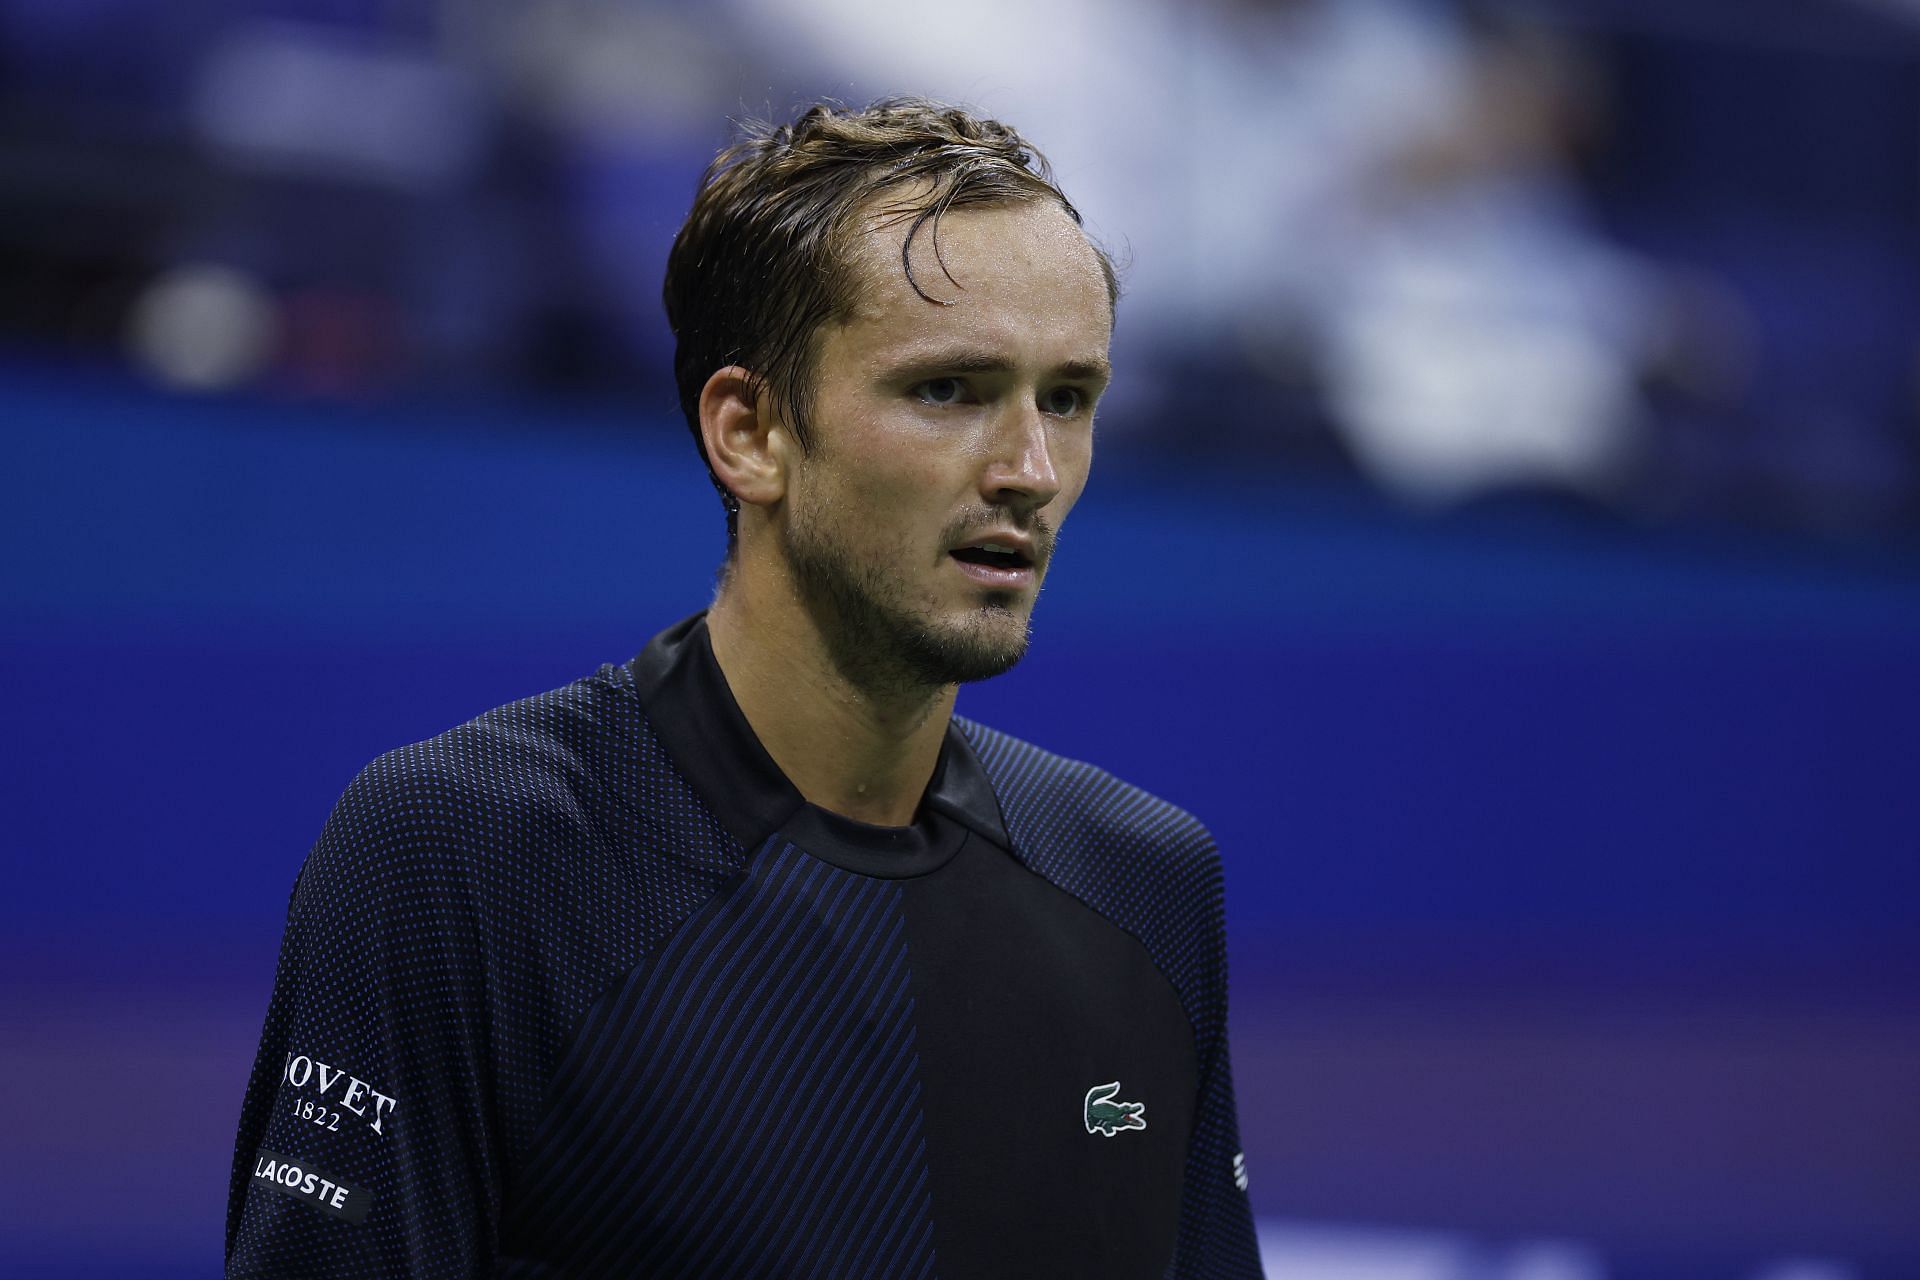 Daniil Medvedev will look to reach the semifinals of the Erste Bank Open